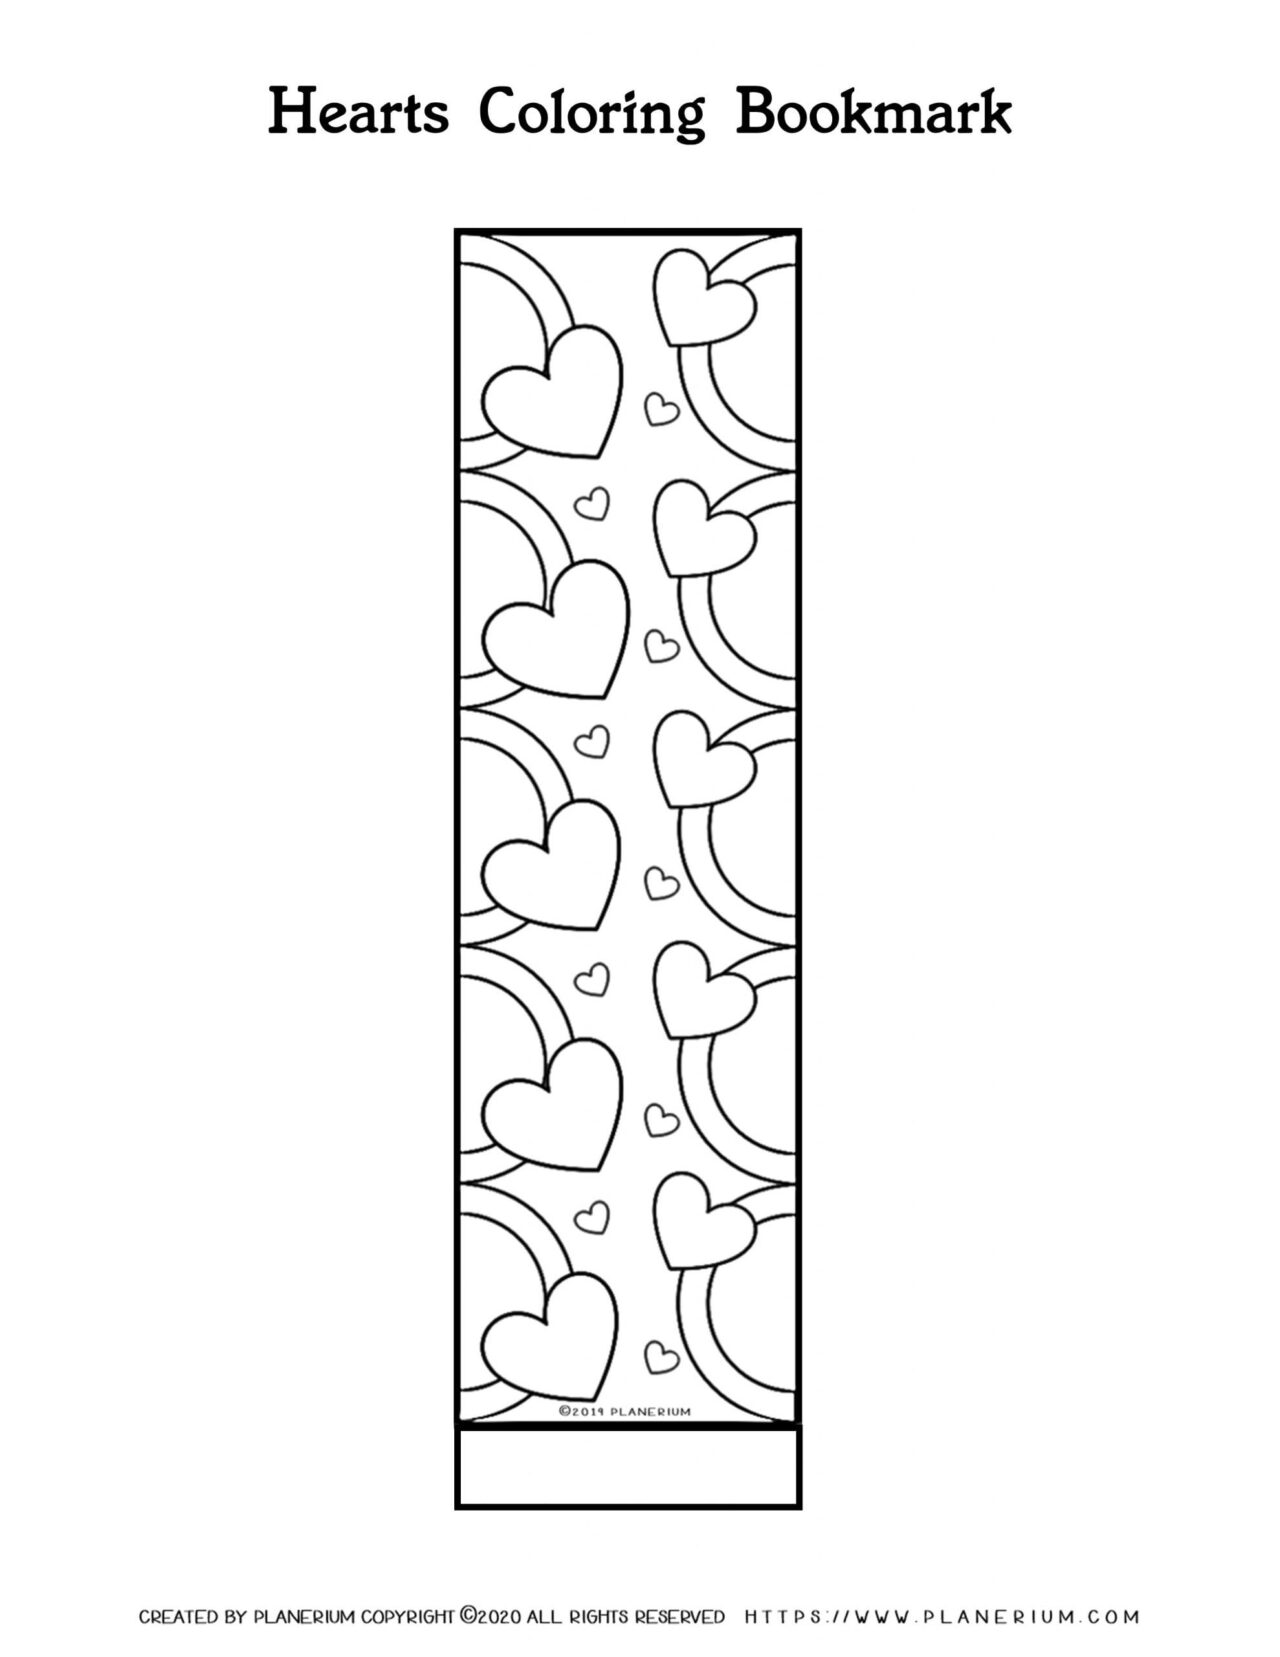 Valentines Day Coloring Page - Bookmark Rings of Hearts